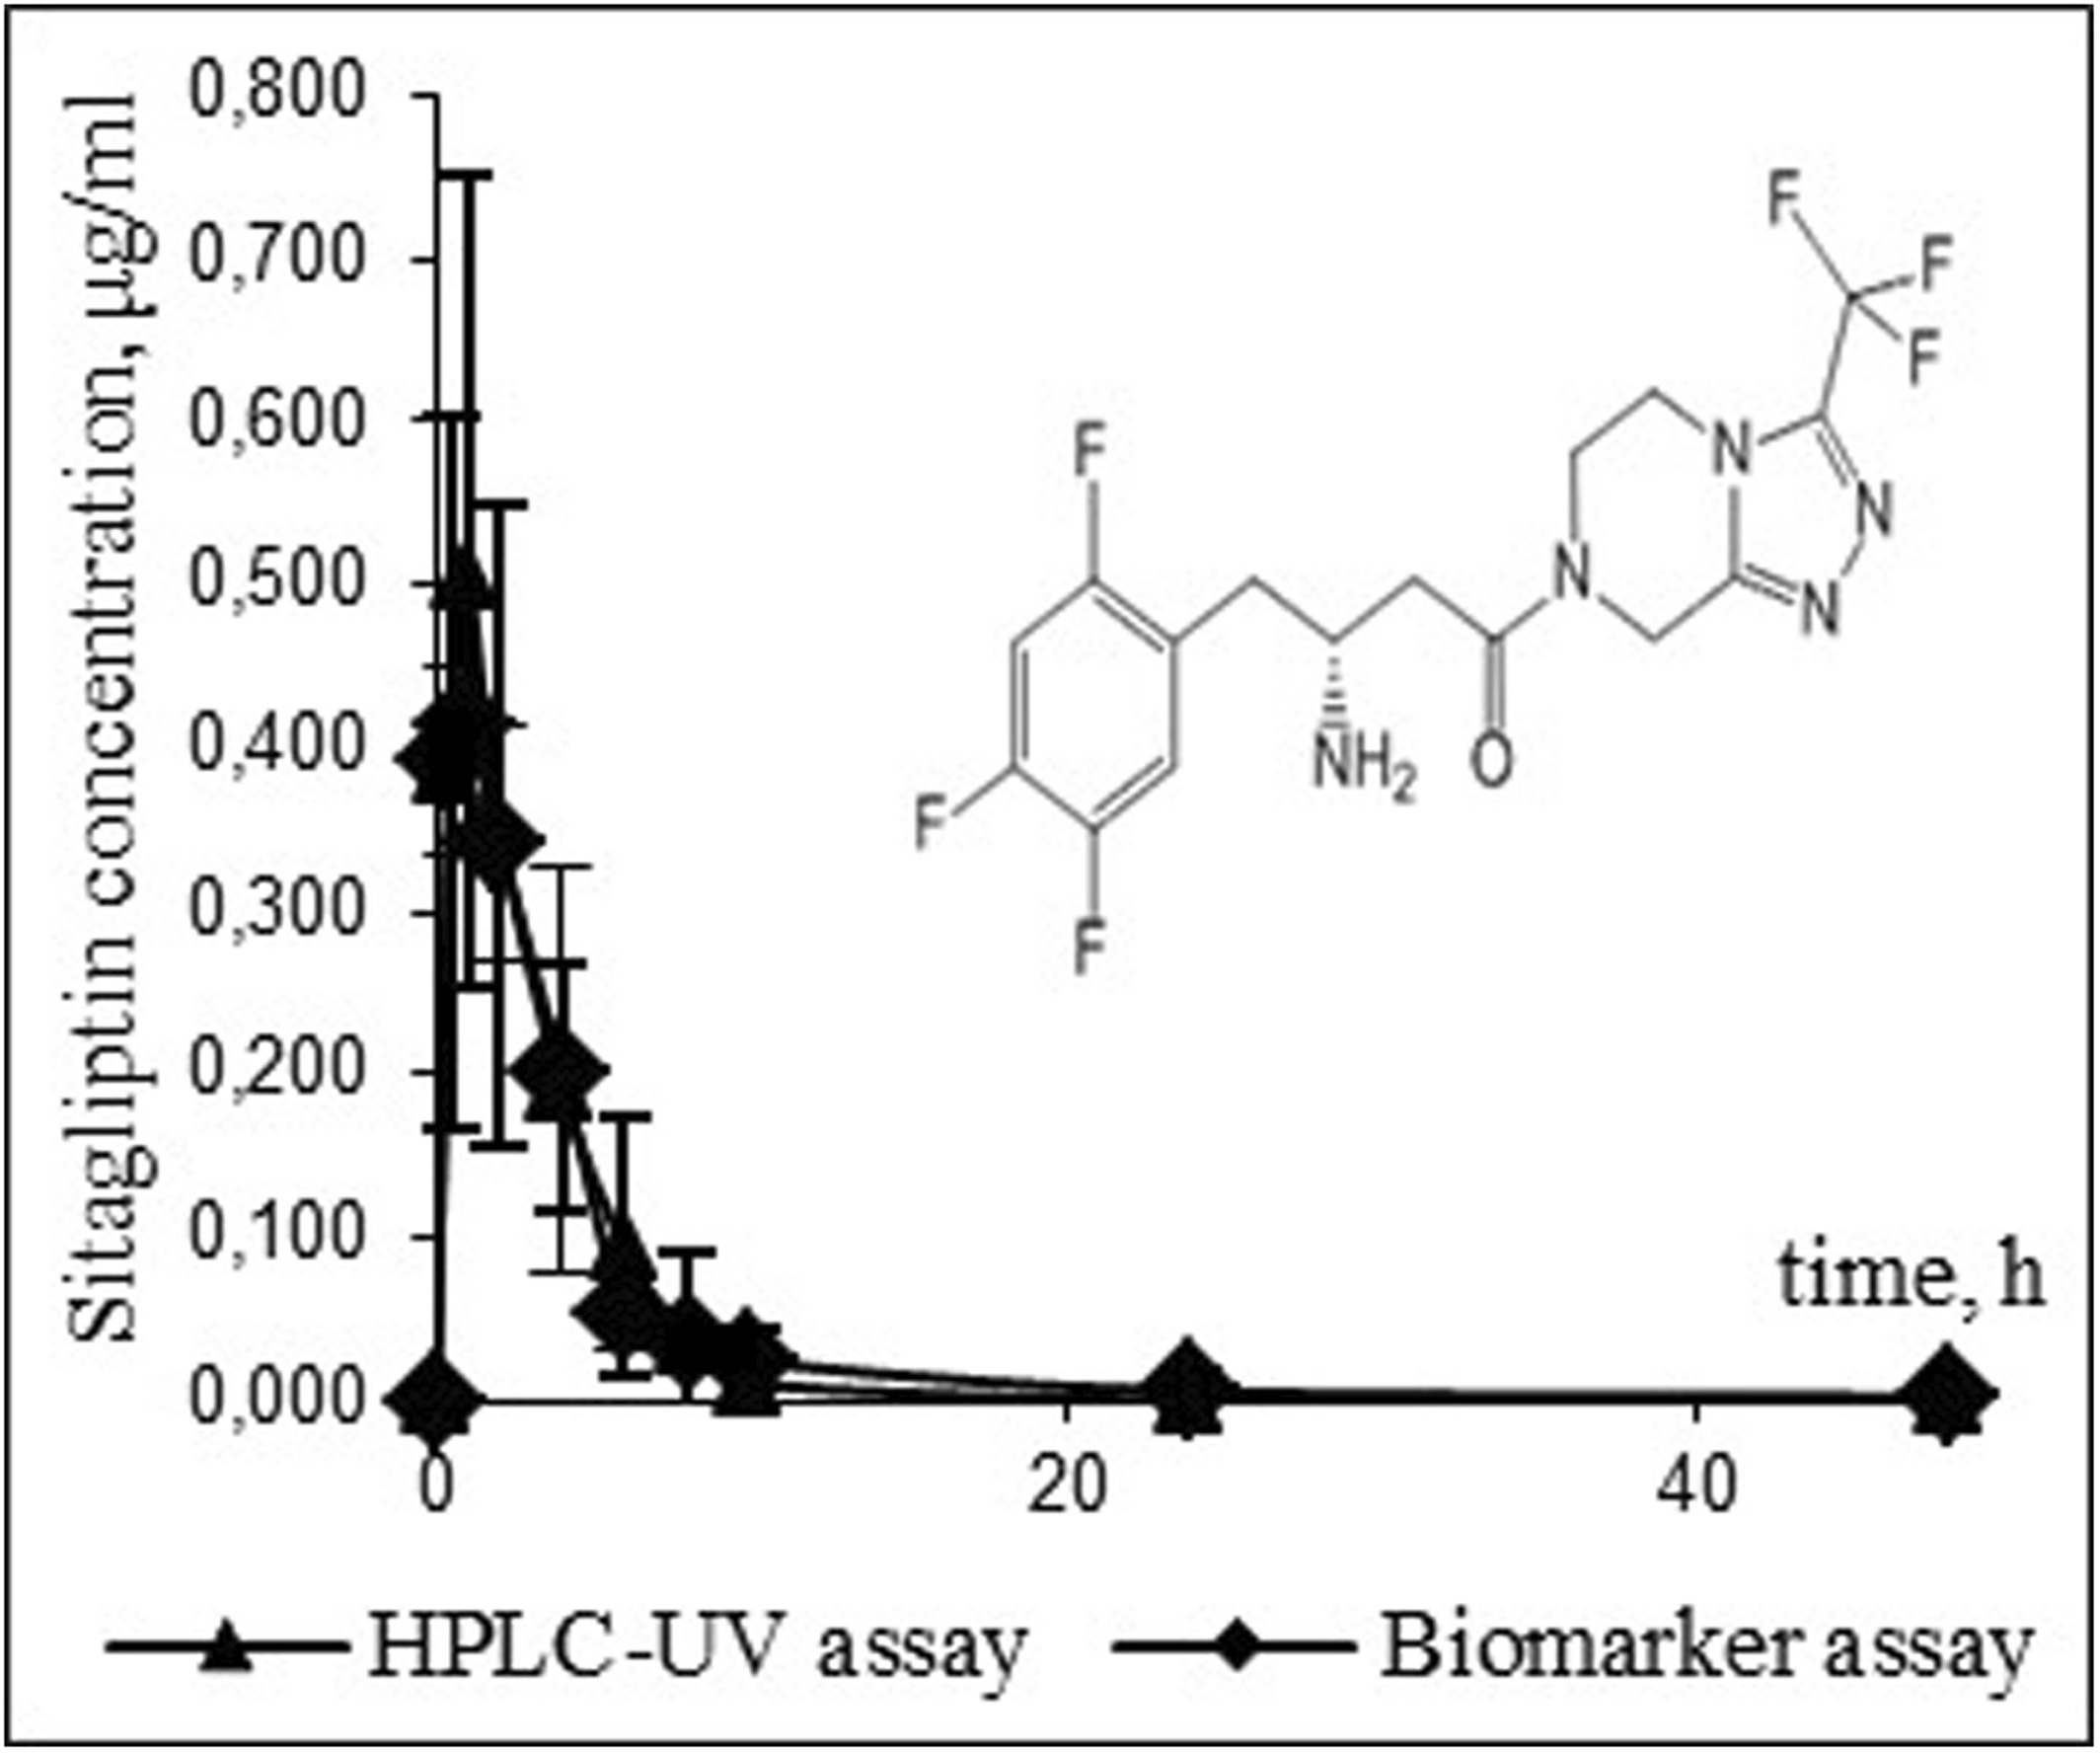 Comparison of biomarker and chromatographic analytical approaches to pharmacokinetic study of sitagliptin